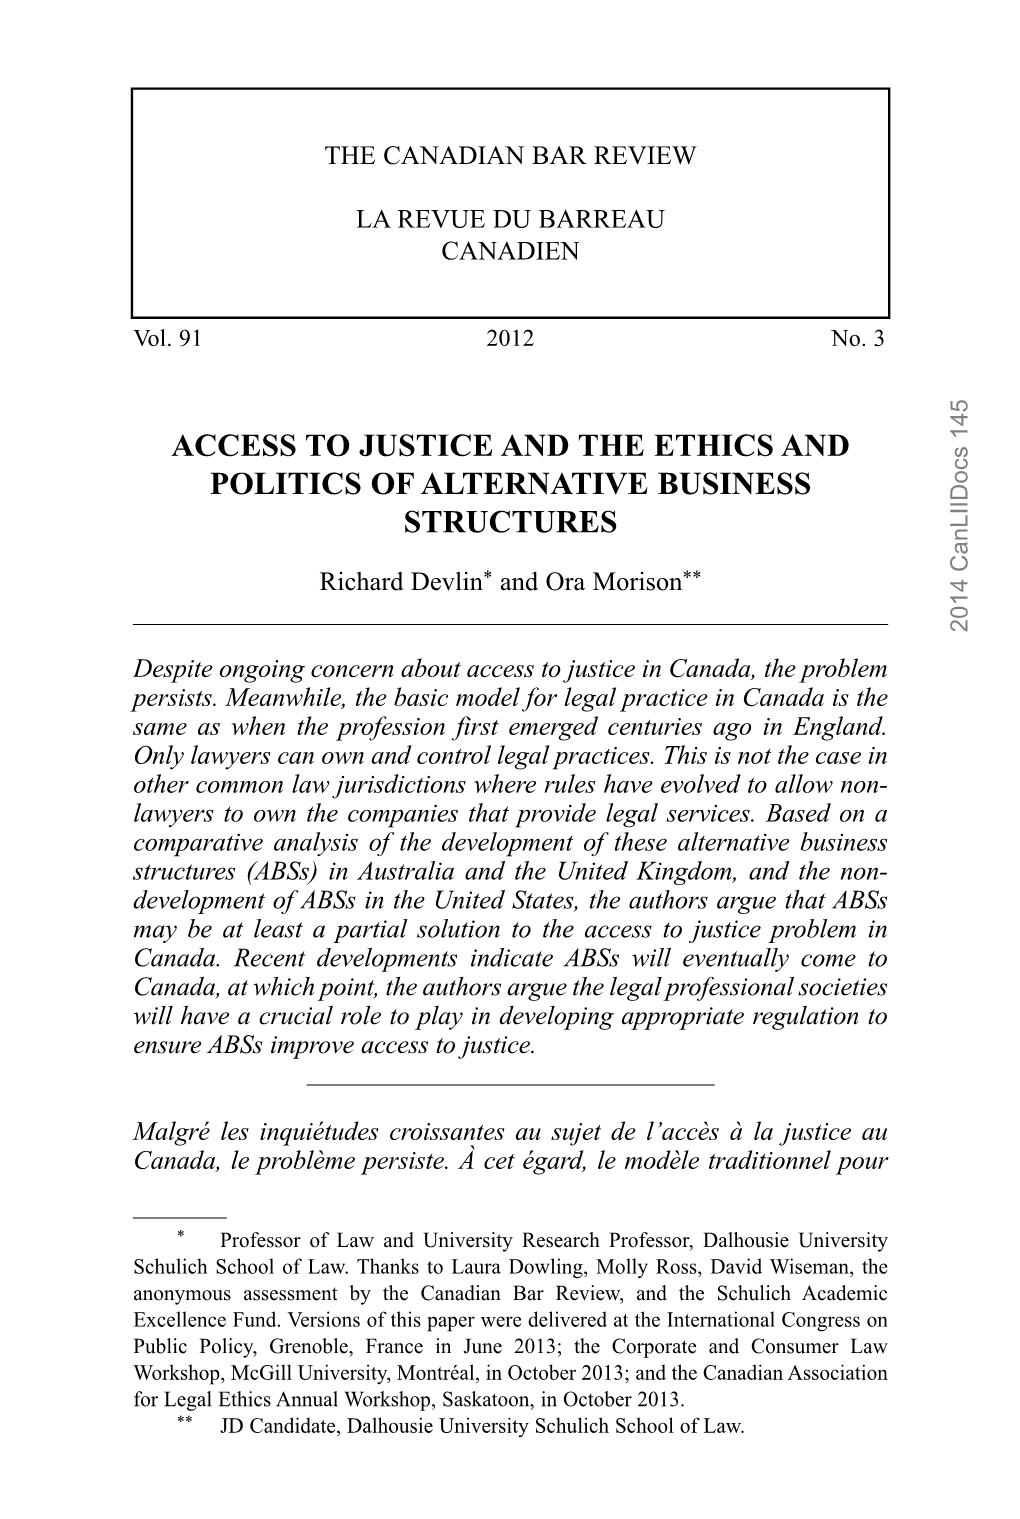 Access to Justice and the Ethics and Politics of Alternative Business Structures